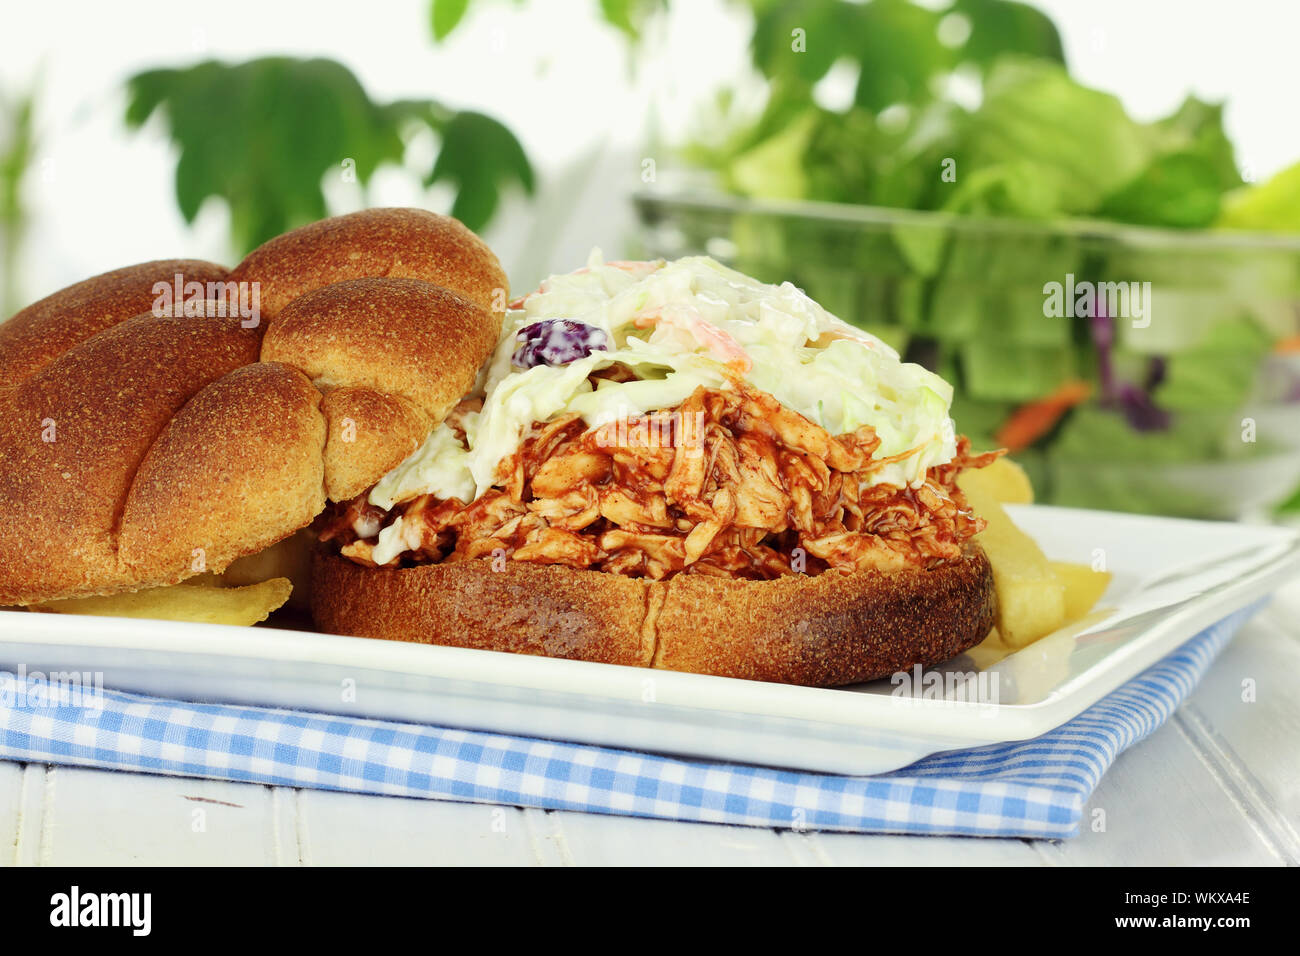 Slaw burger with whole wheat buns, fries and salad. Stock Photo